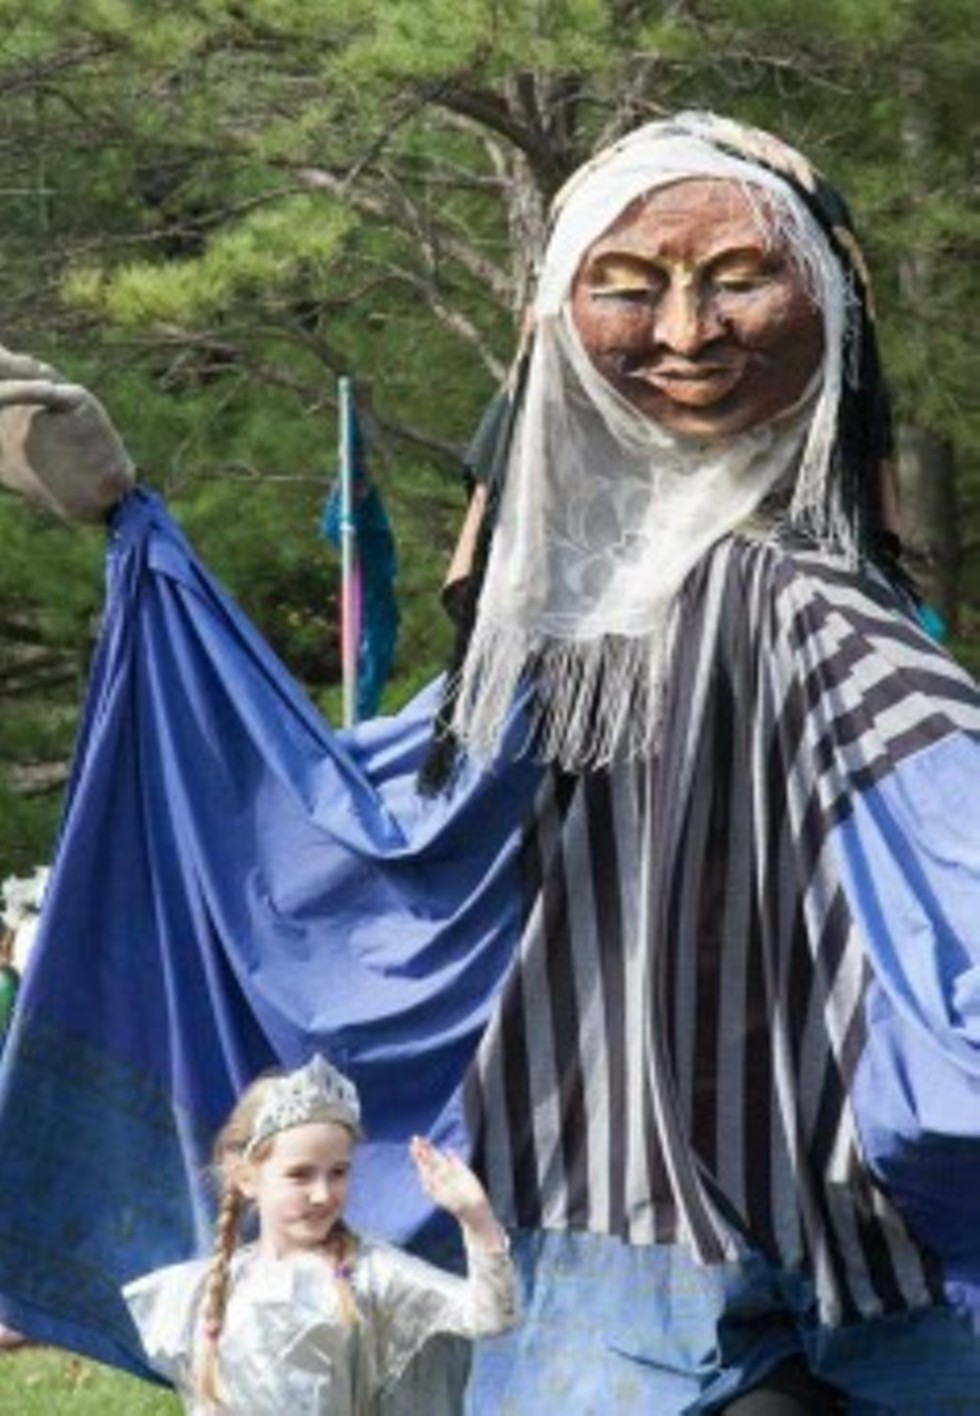 Wise woman and friend at Beltane 2014